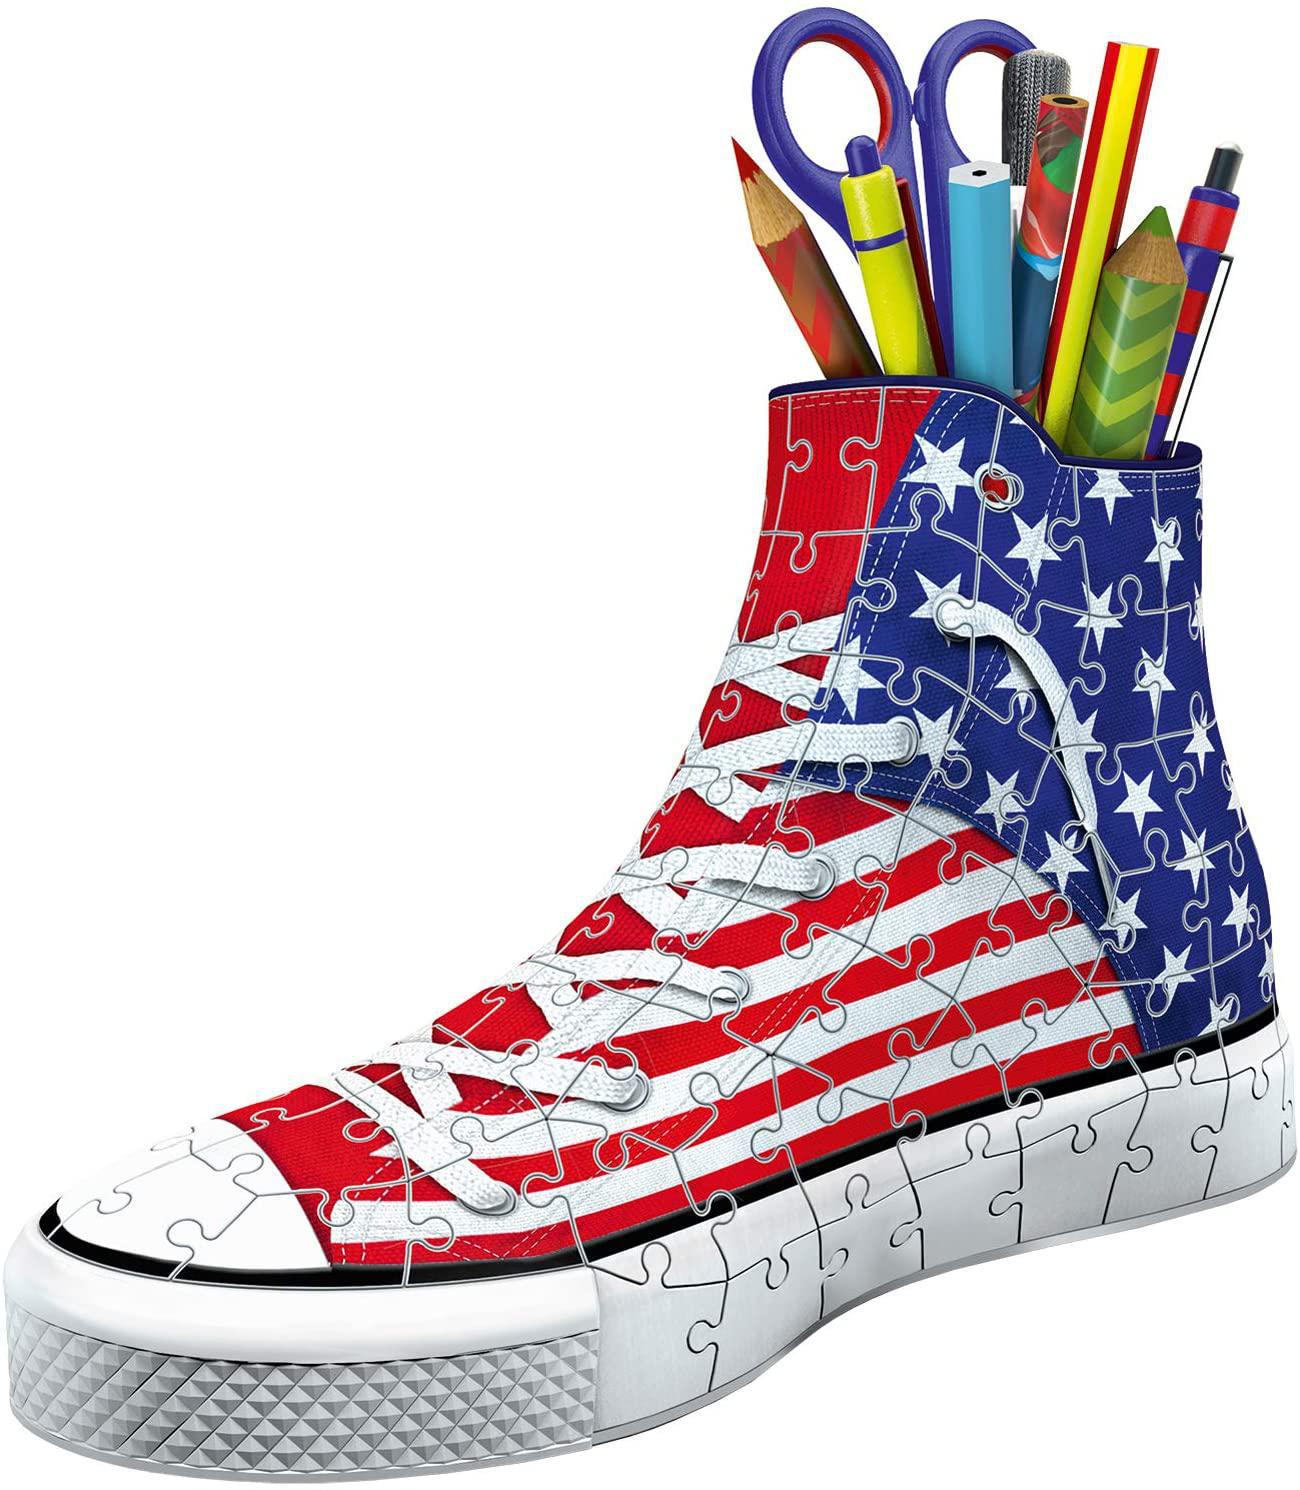 Sneaker American Style 108 Piece 3D Jigsaw Puzzle for Kids and Adults - Easy To Build, Pieces Fit Together Perfectly